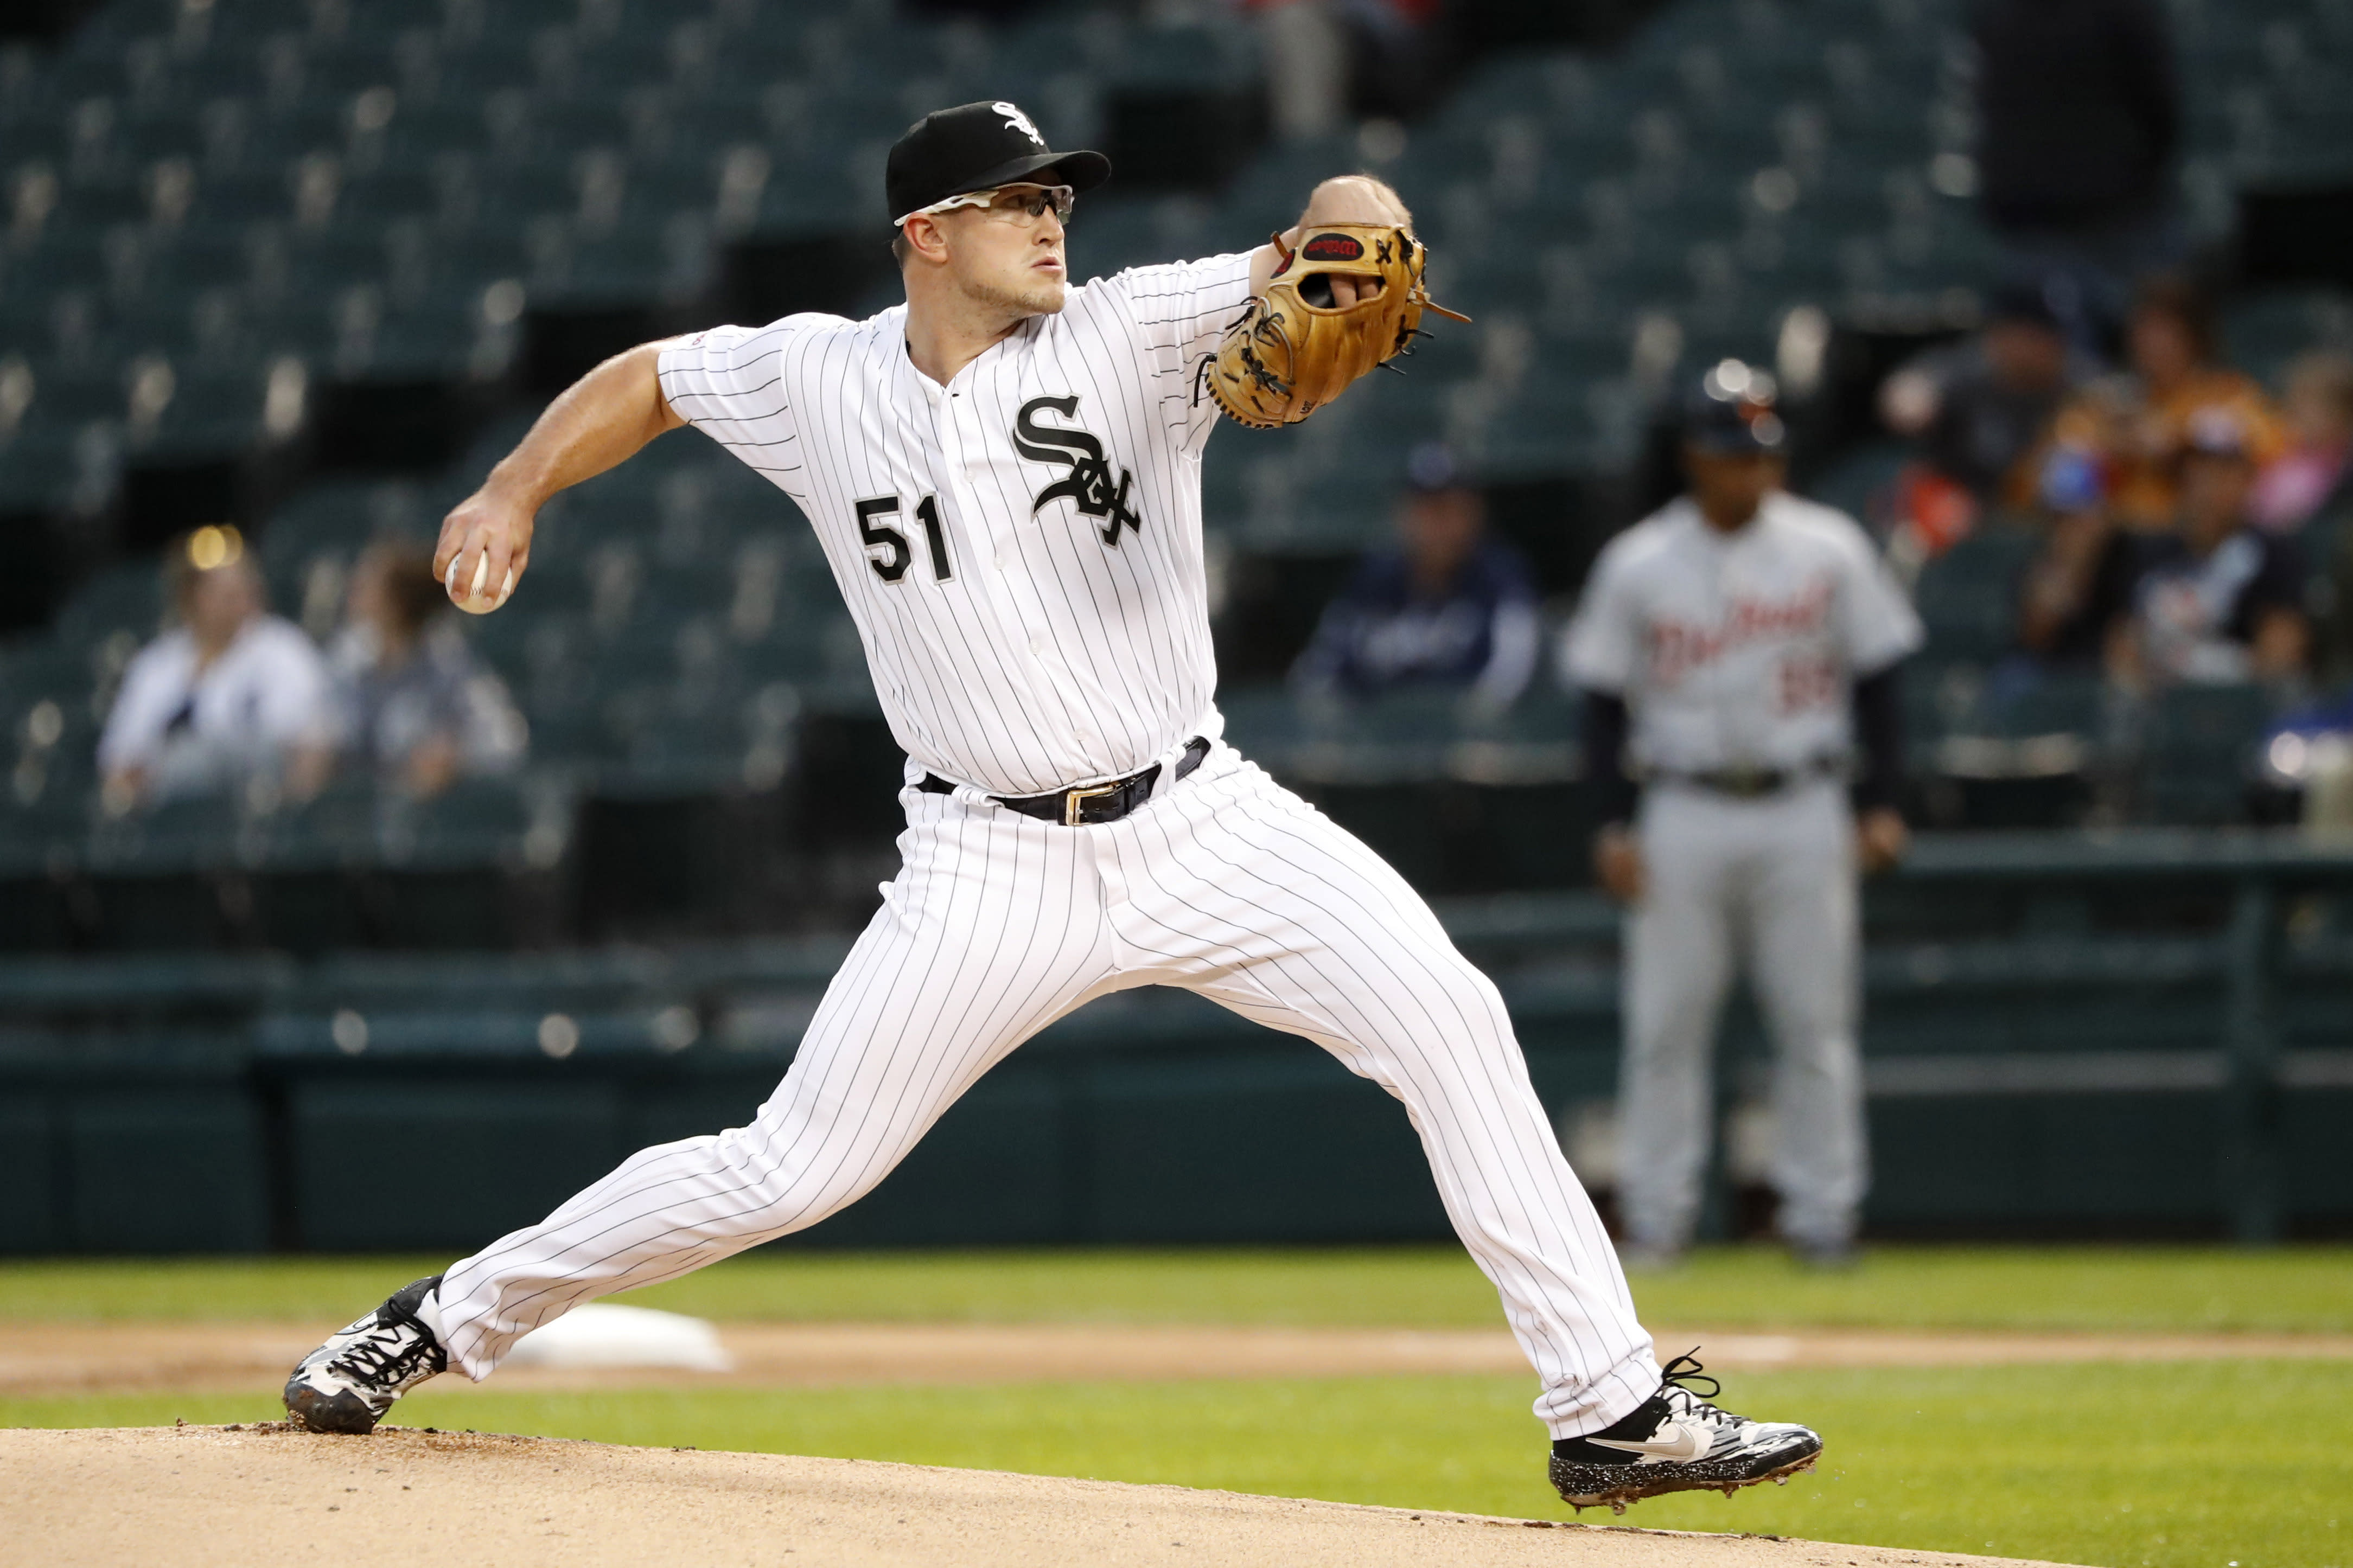 TigersWhite Sox rained out, will play 161 games this year